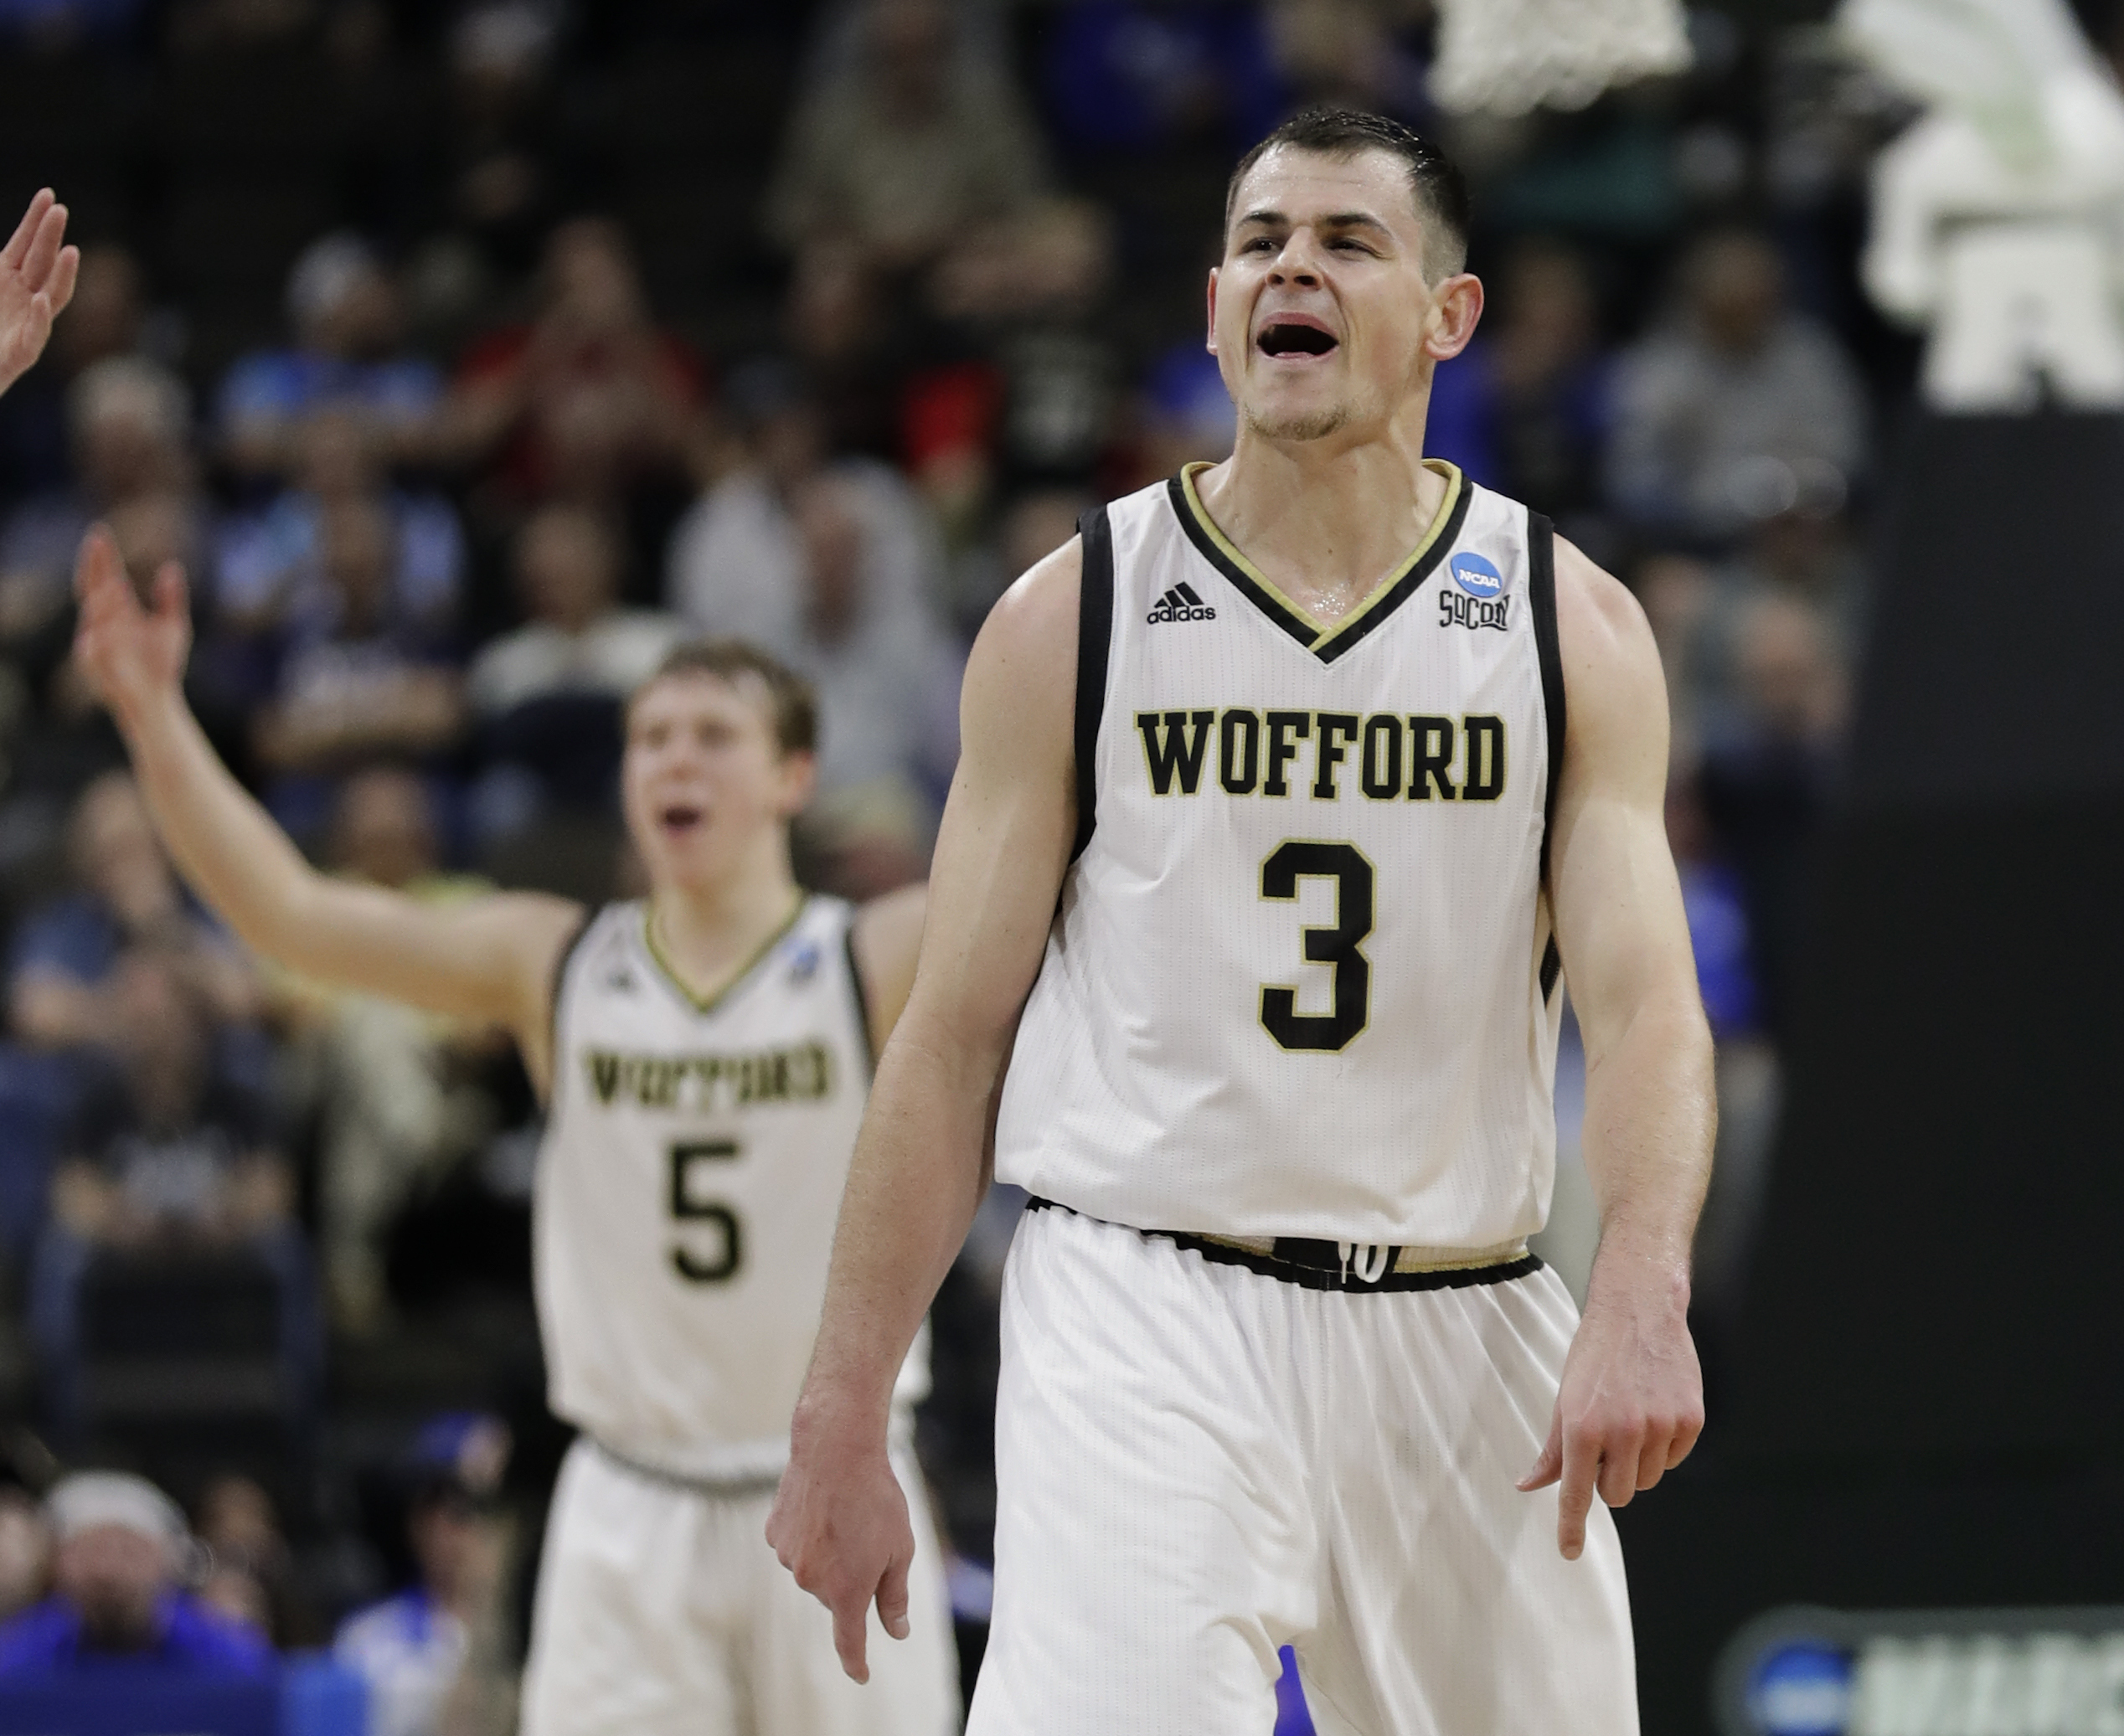 NCAA Latest: Time to see if upstarts can reach Sweet 16